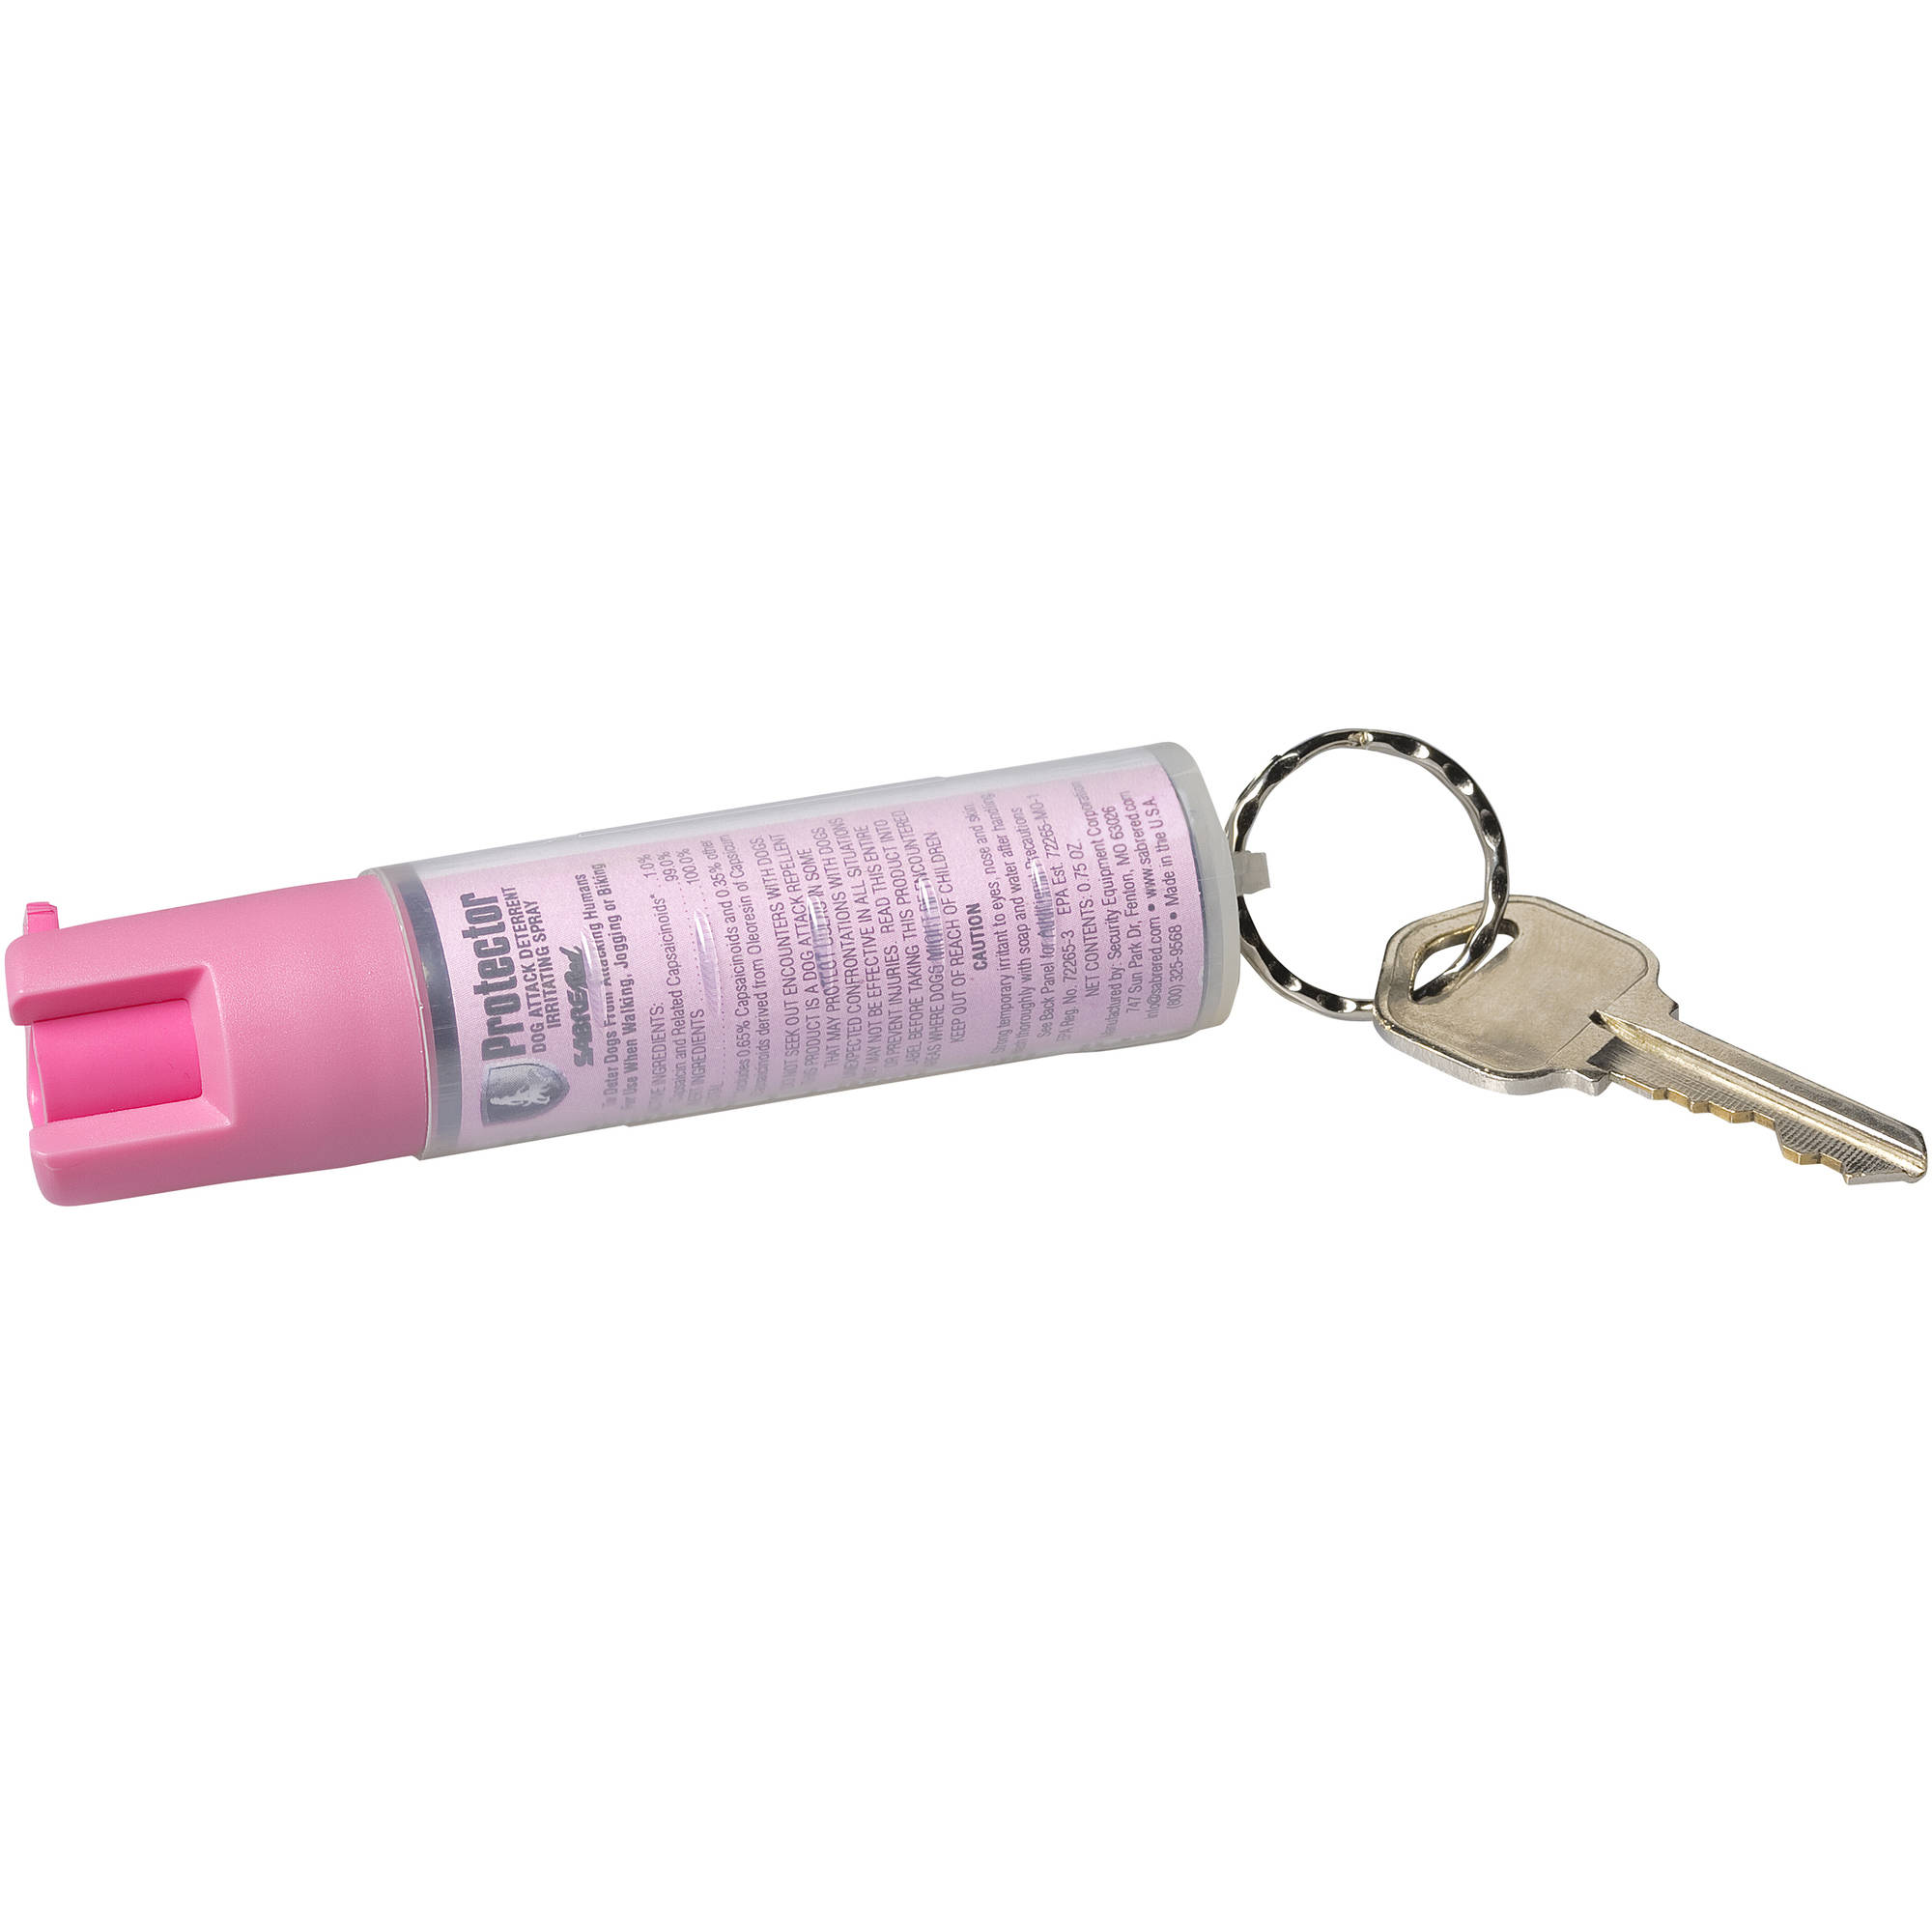 Protector Dog Spray, Dog Attack Deterrent with Key Ring, 14 One-Second Bursts & 12' (4m) Range, Supports National Breast Cancer Foundation (Over $1.2 Million Donated So Far) - image 2 of 9